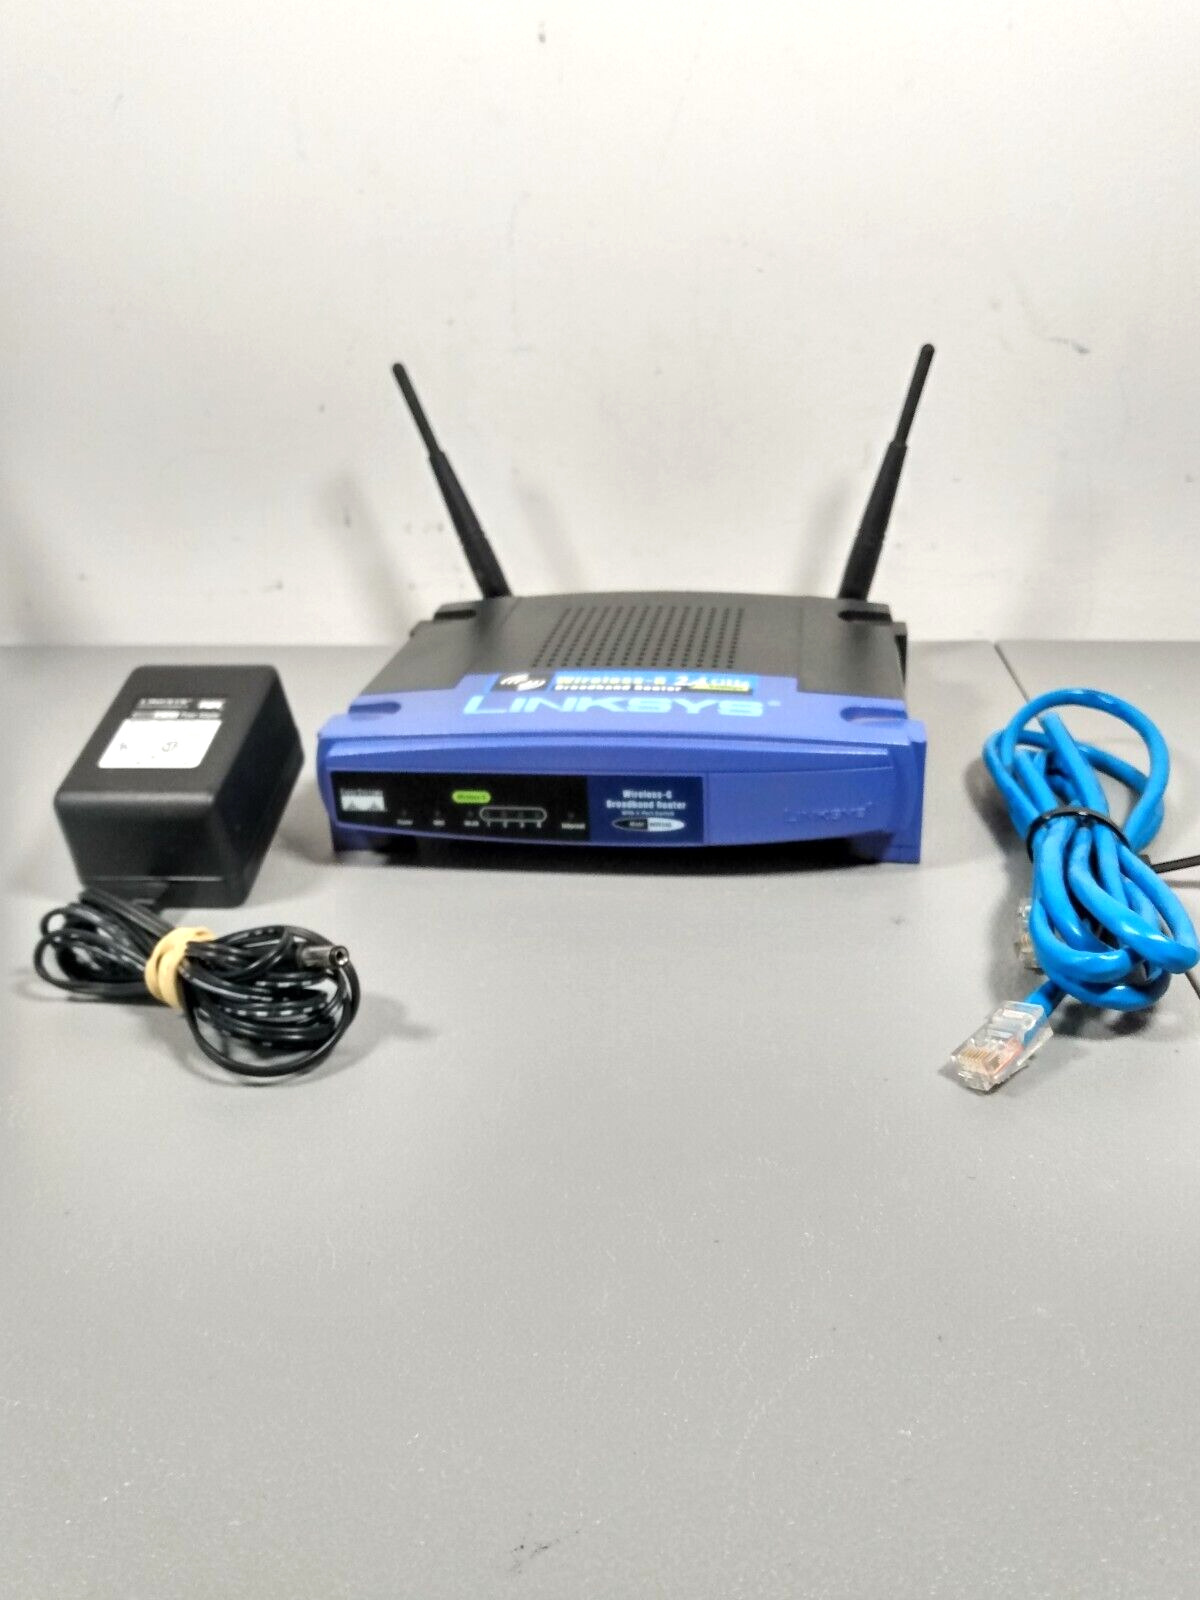 Linksys Wireless-G Broadband Router 2.4 GHz 54 Mbps 4-Port WRT54G Ver. 2 AS IS